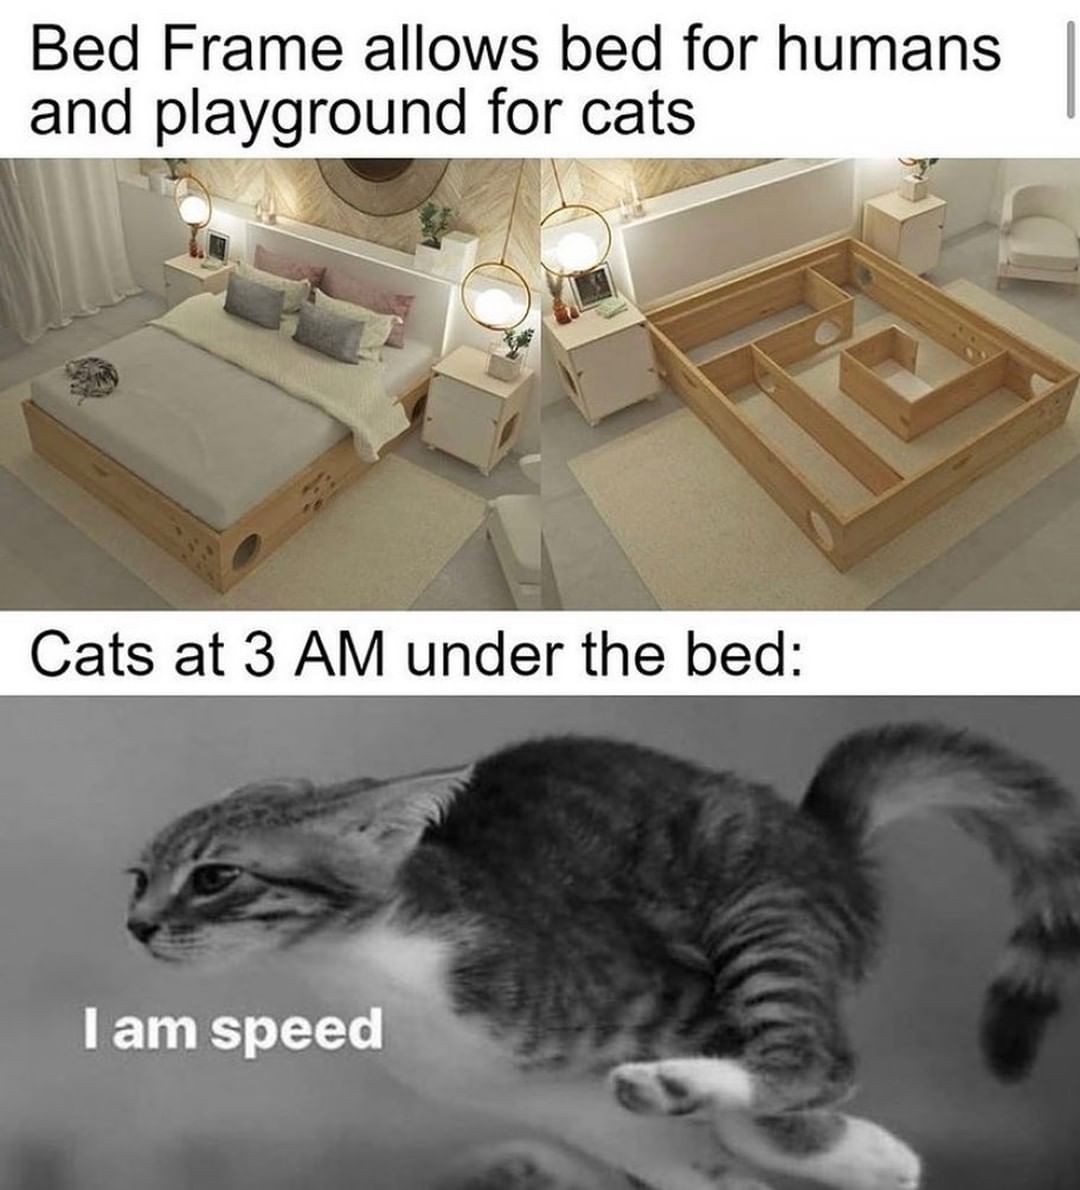 Bed Frame allows bed for humans and playground for cats. Cats at 3 AM under the bed: I am speed.